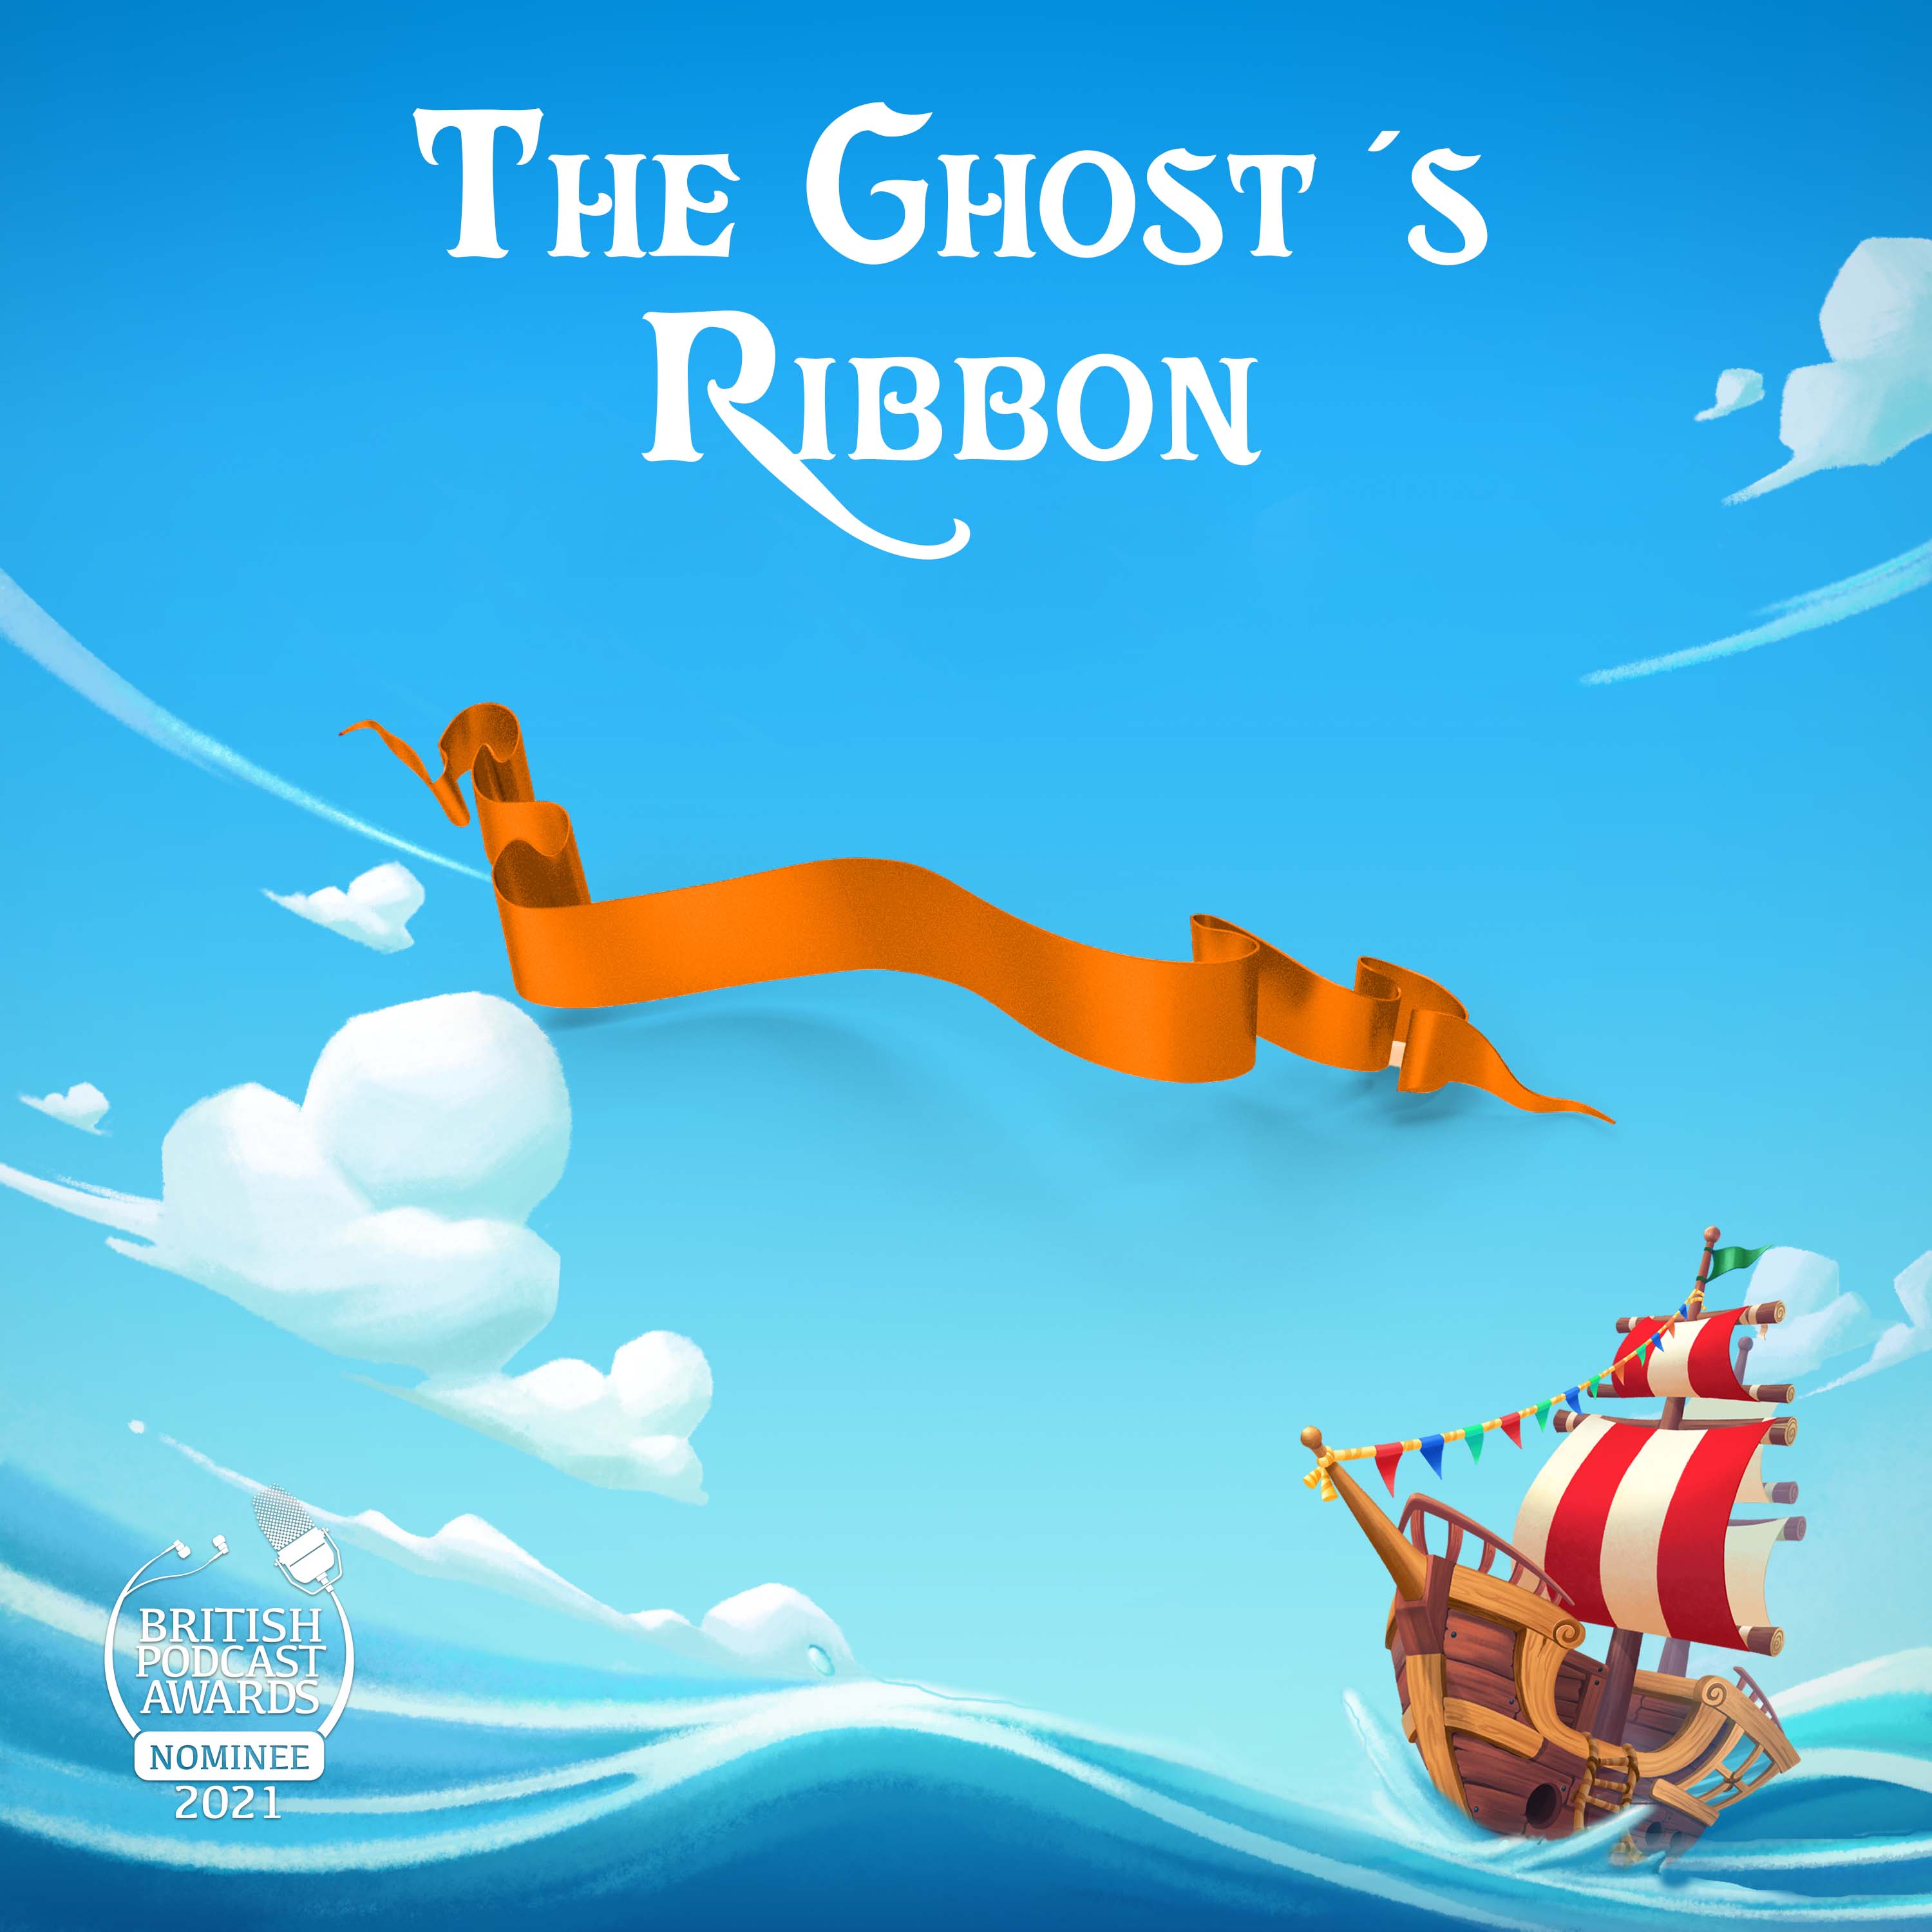 The Ghost's Ribbon